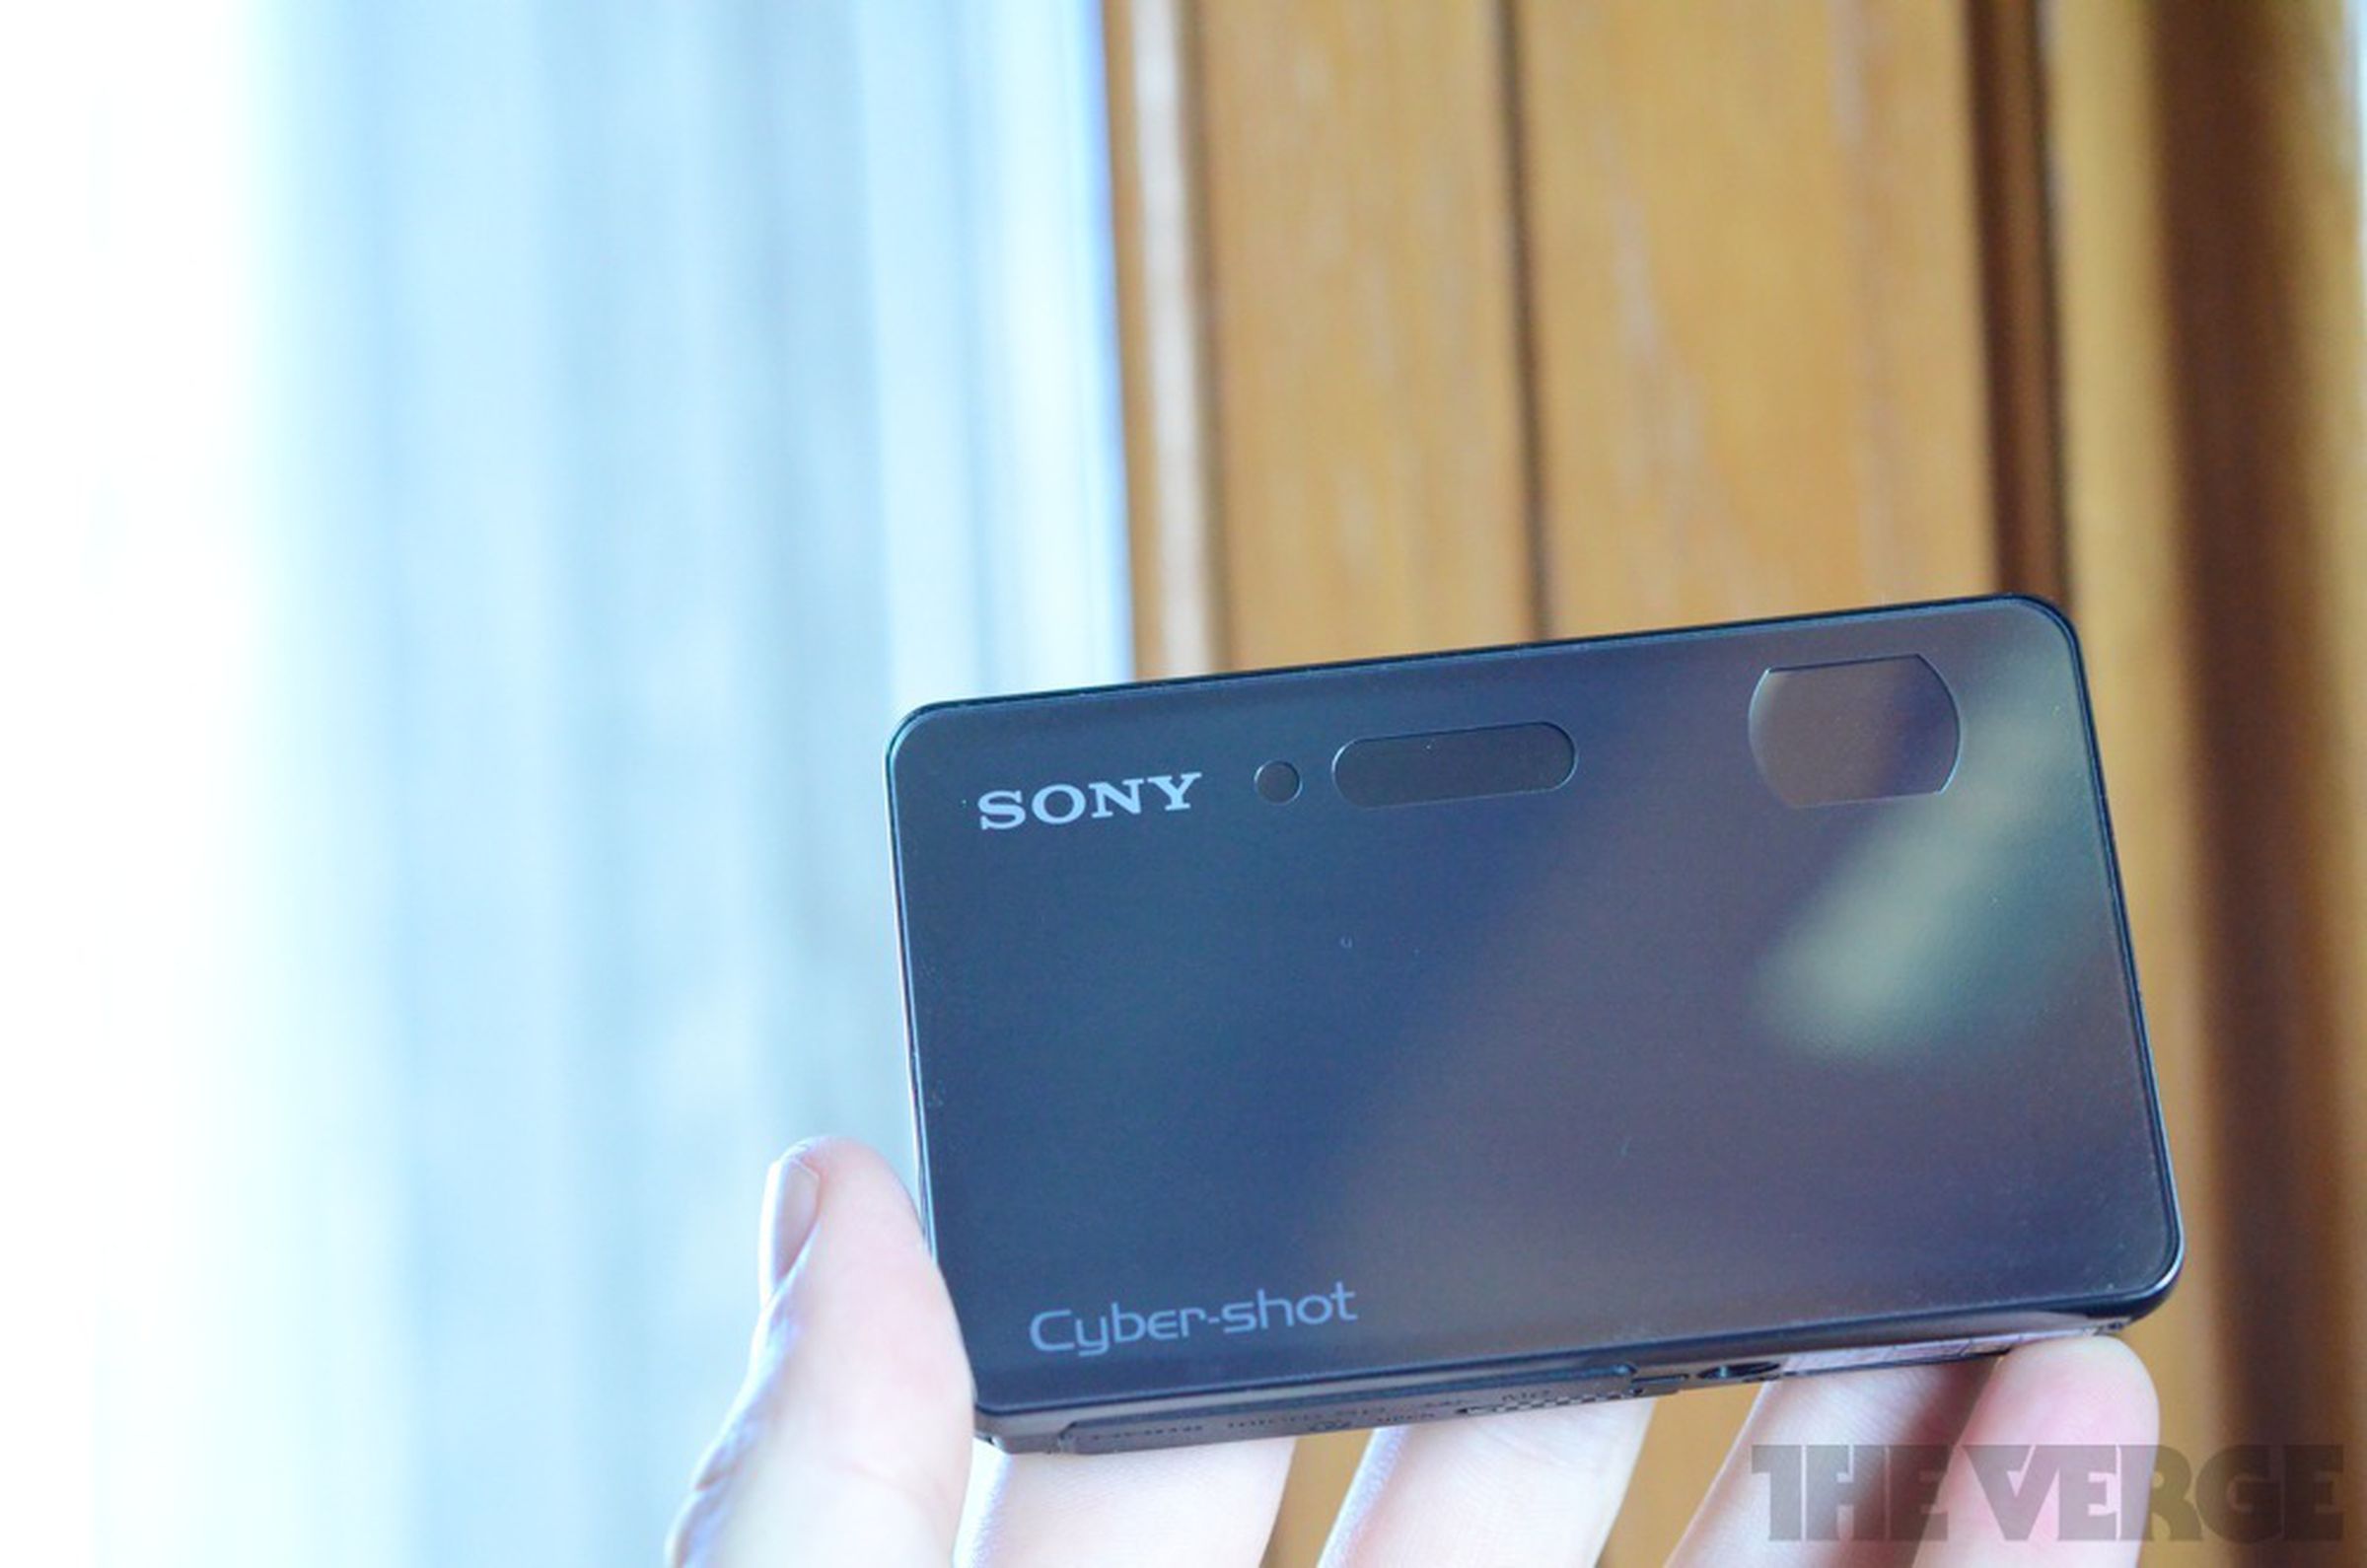 Sony Cyber-shot WX50, WX70, and TX200V hands-on pictures